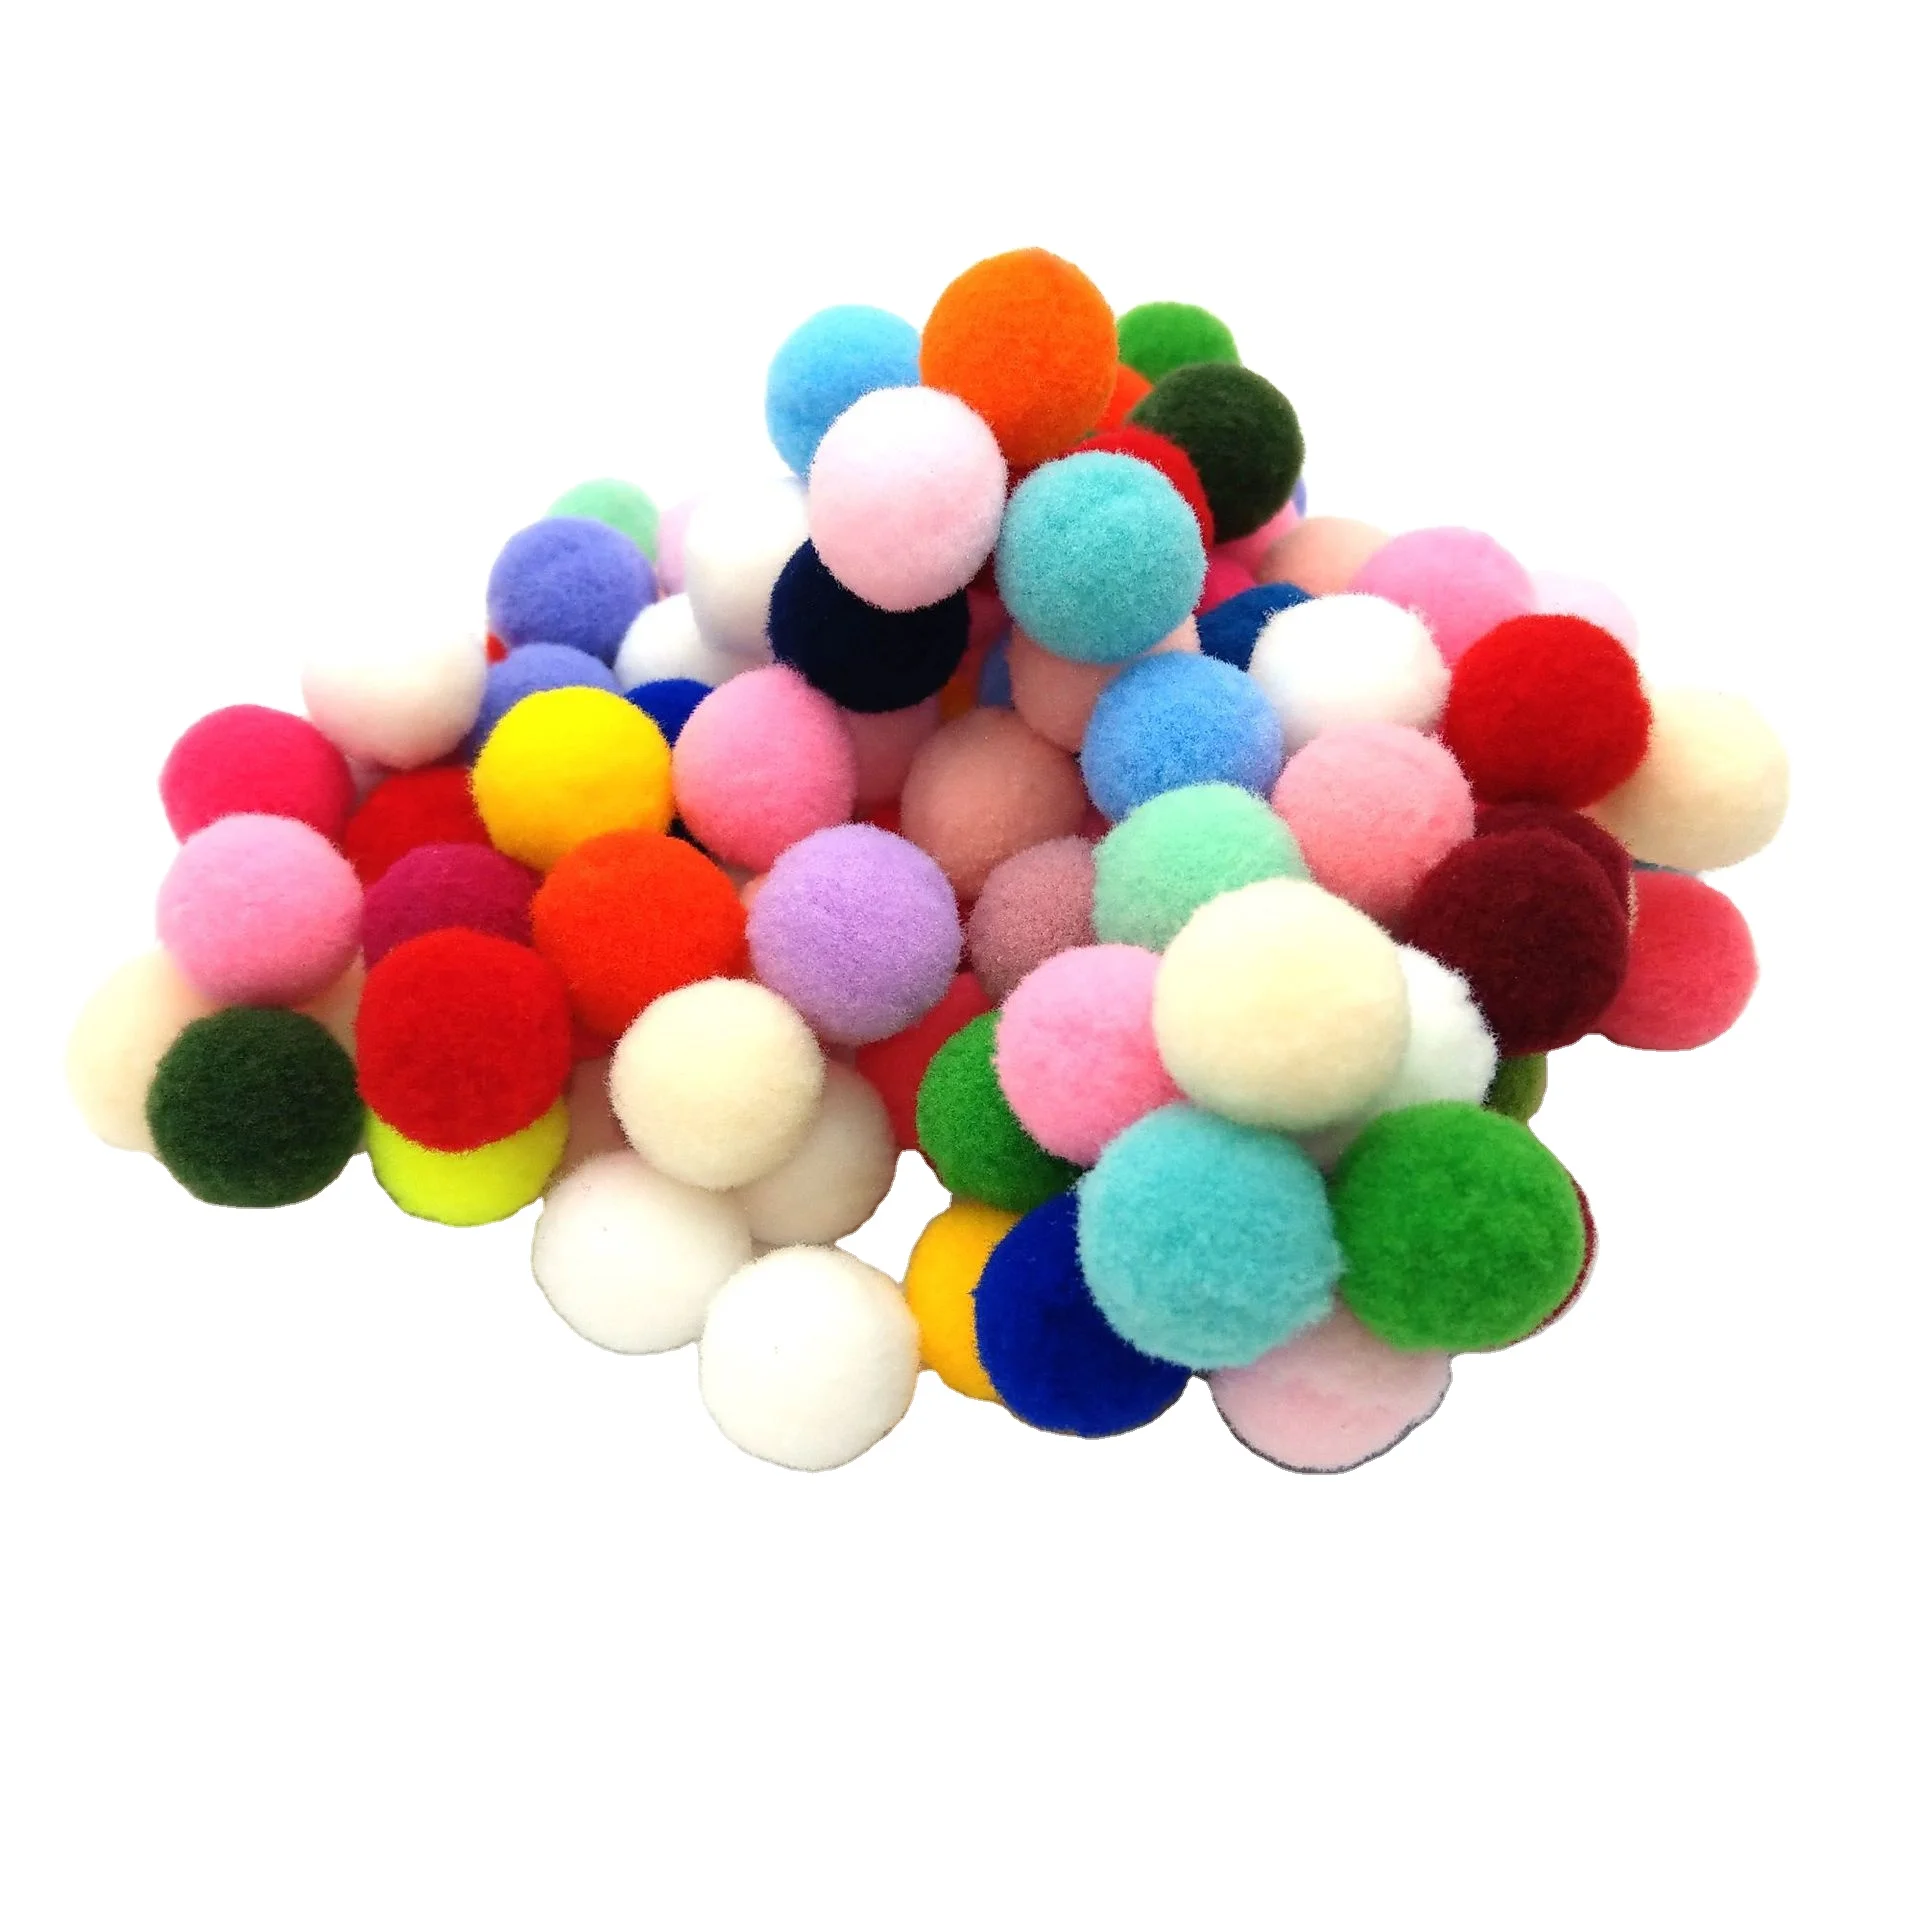 radius solsikke aritmetik Assorted Pompoms Multicolor Arts And Crafts Fuzzy Pom Poms Balls For Diy  Creative Crafts Decorations - Buy Pompom Ball,Decorative Balls For  Ceiling,Diy Plastic Craft Balls Product on Alibaba.com